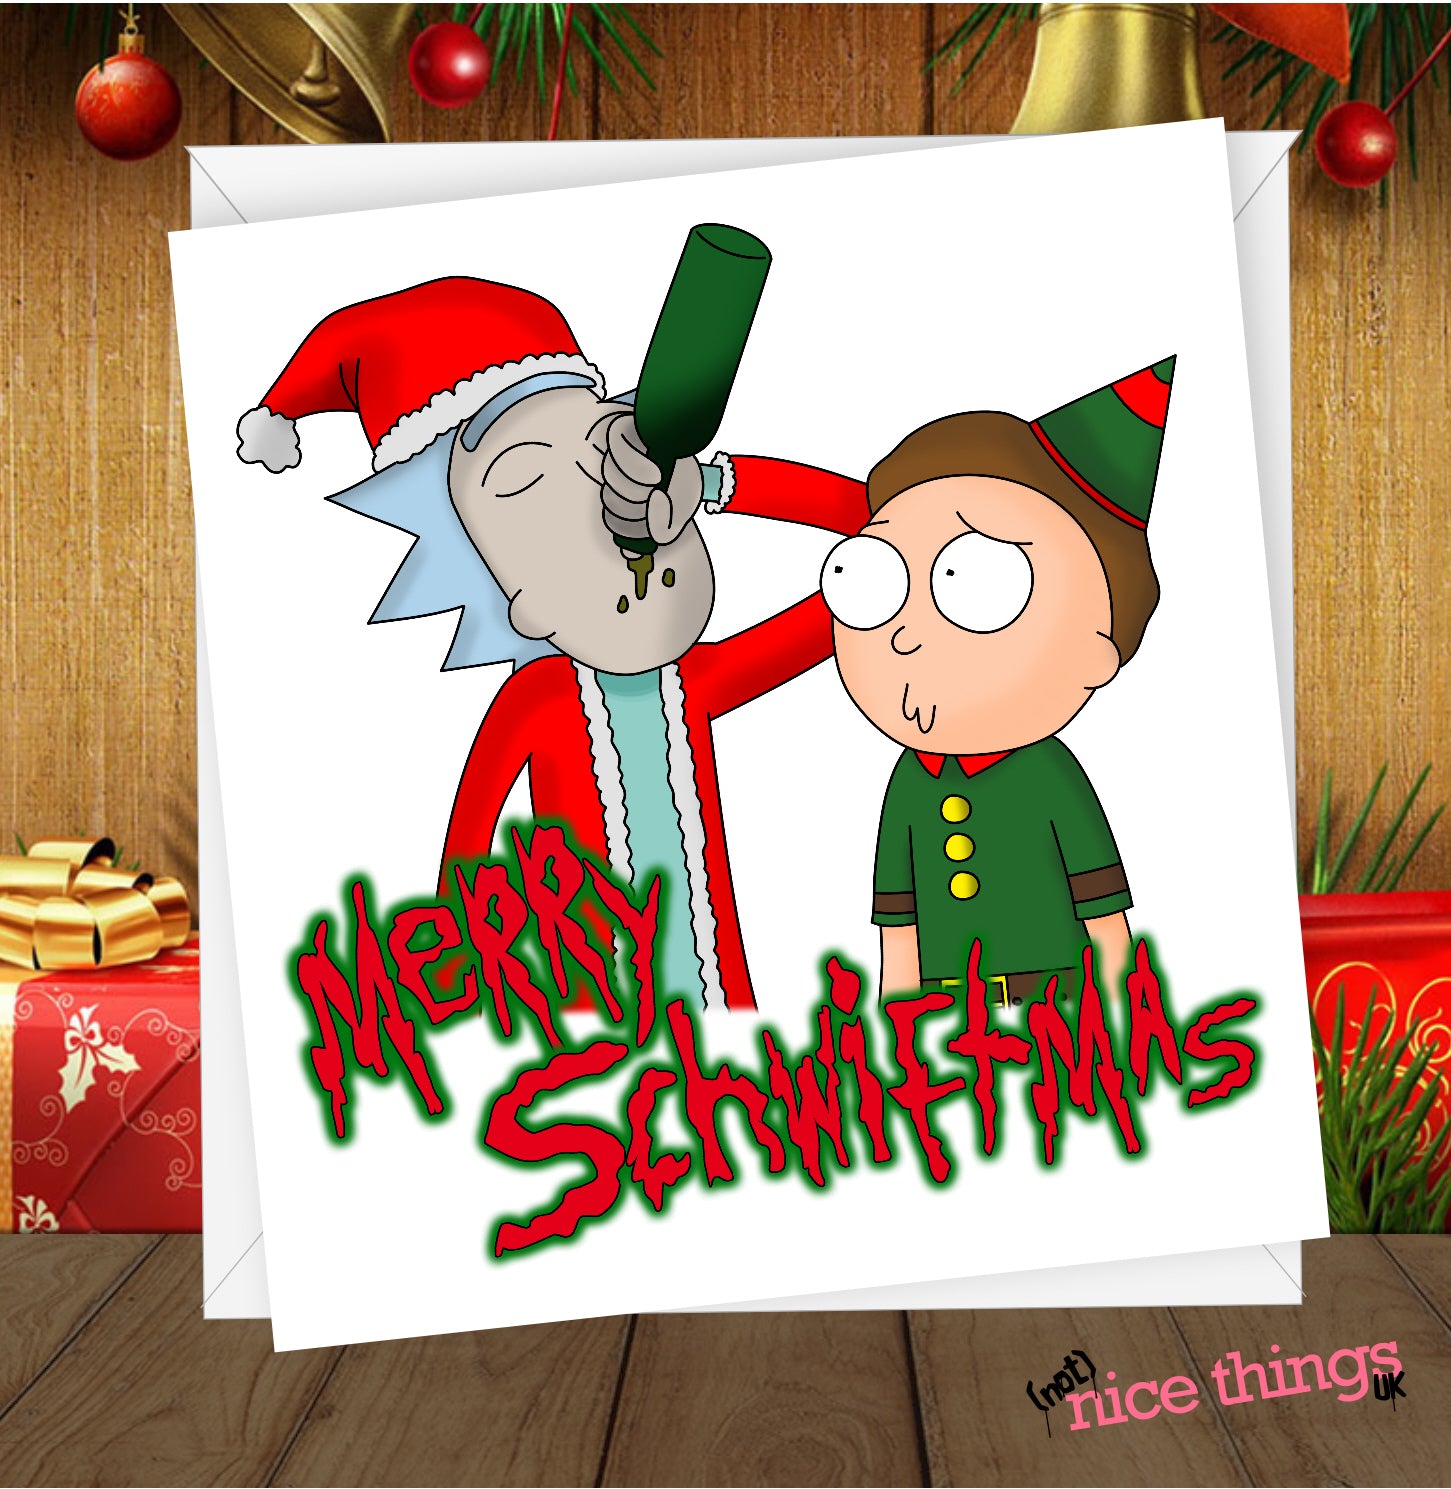 Rick and Morty Funny Christmas Card, Schwiftmas Christmas Greetings Card for him, for her, Boyfriend, Girlfriend, Friend